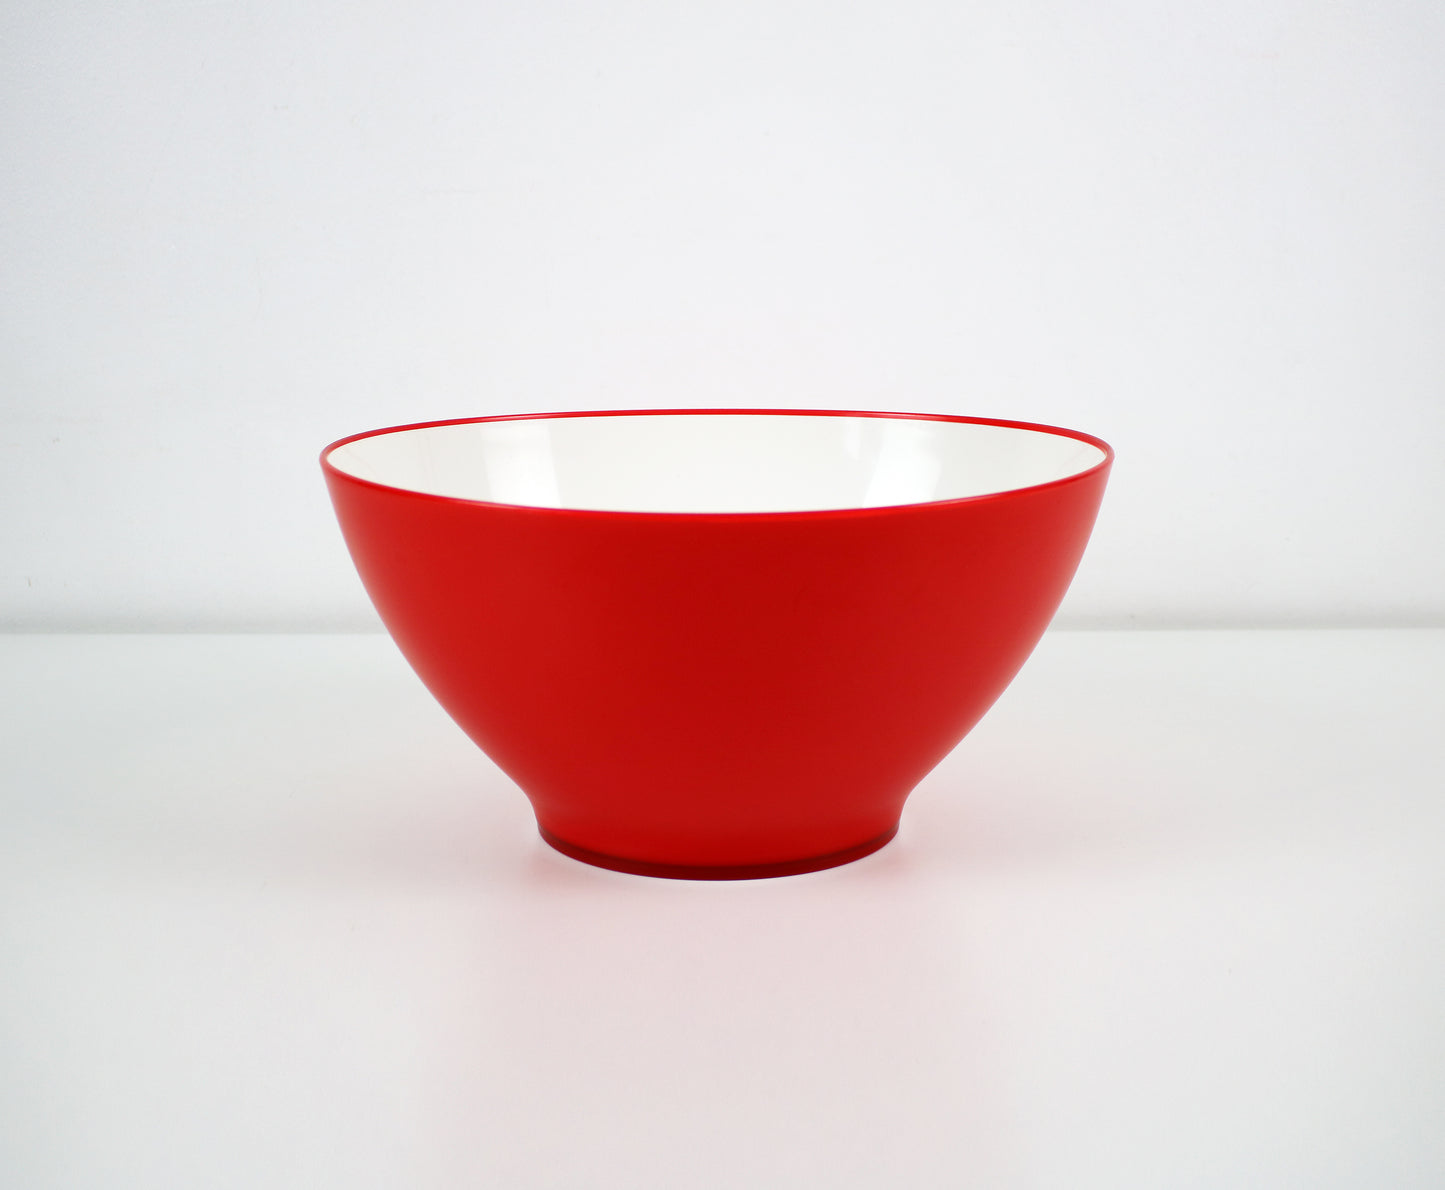 Large oval serving bowl by Jelinek for IKEA Early 21st Century